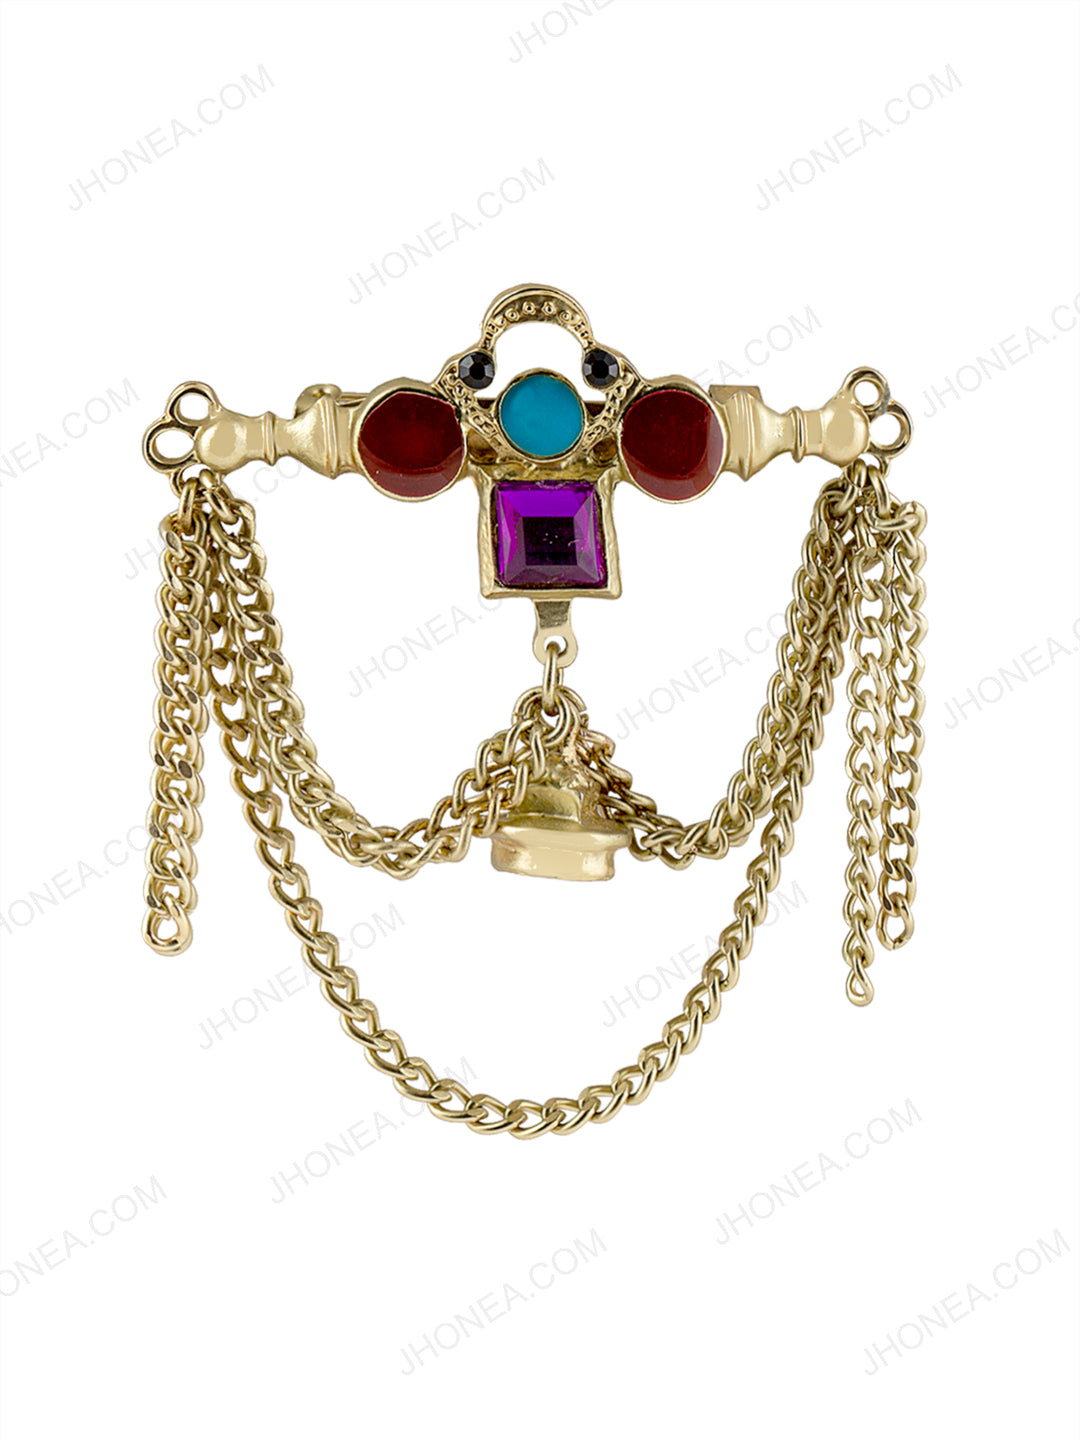 Classic Vintage Beads & Chain Hanging Brooch